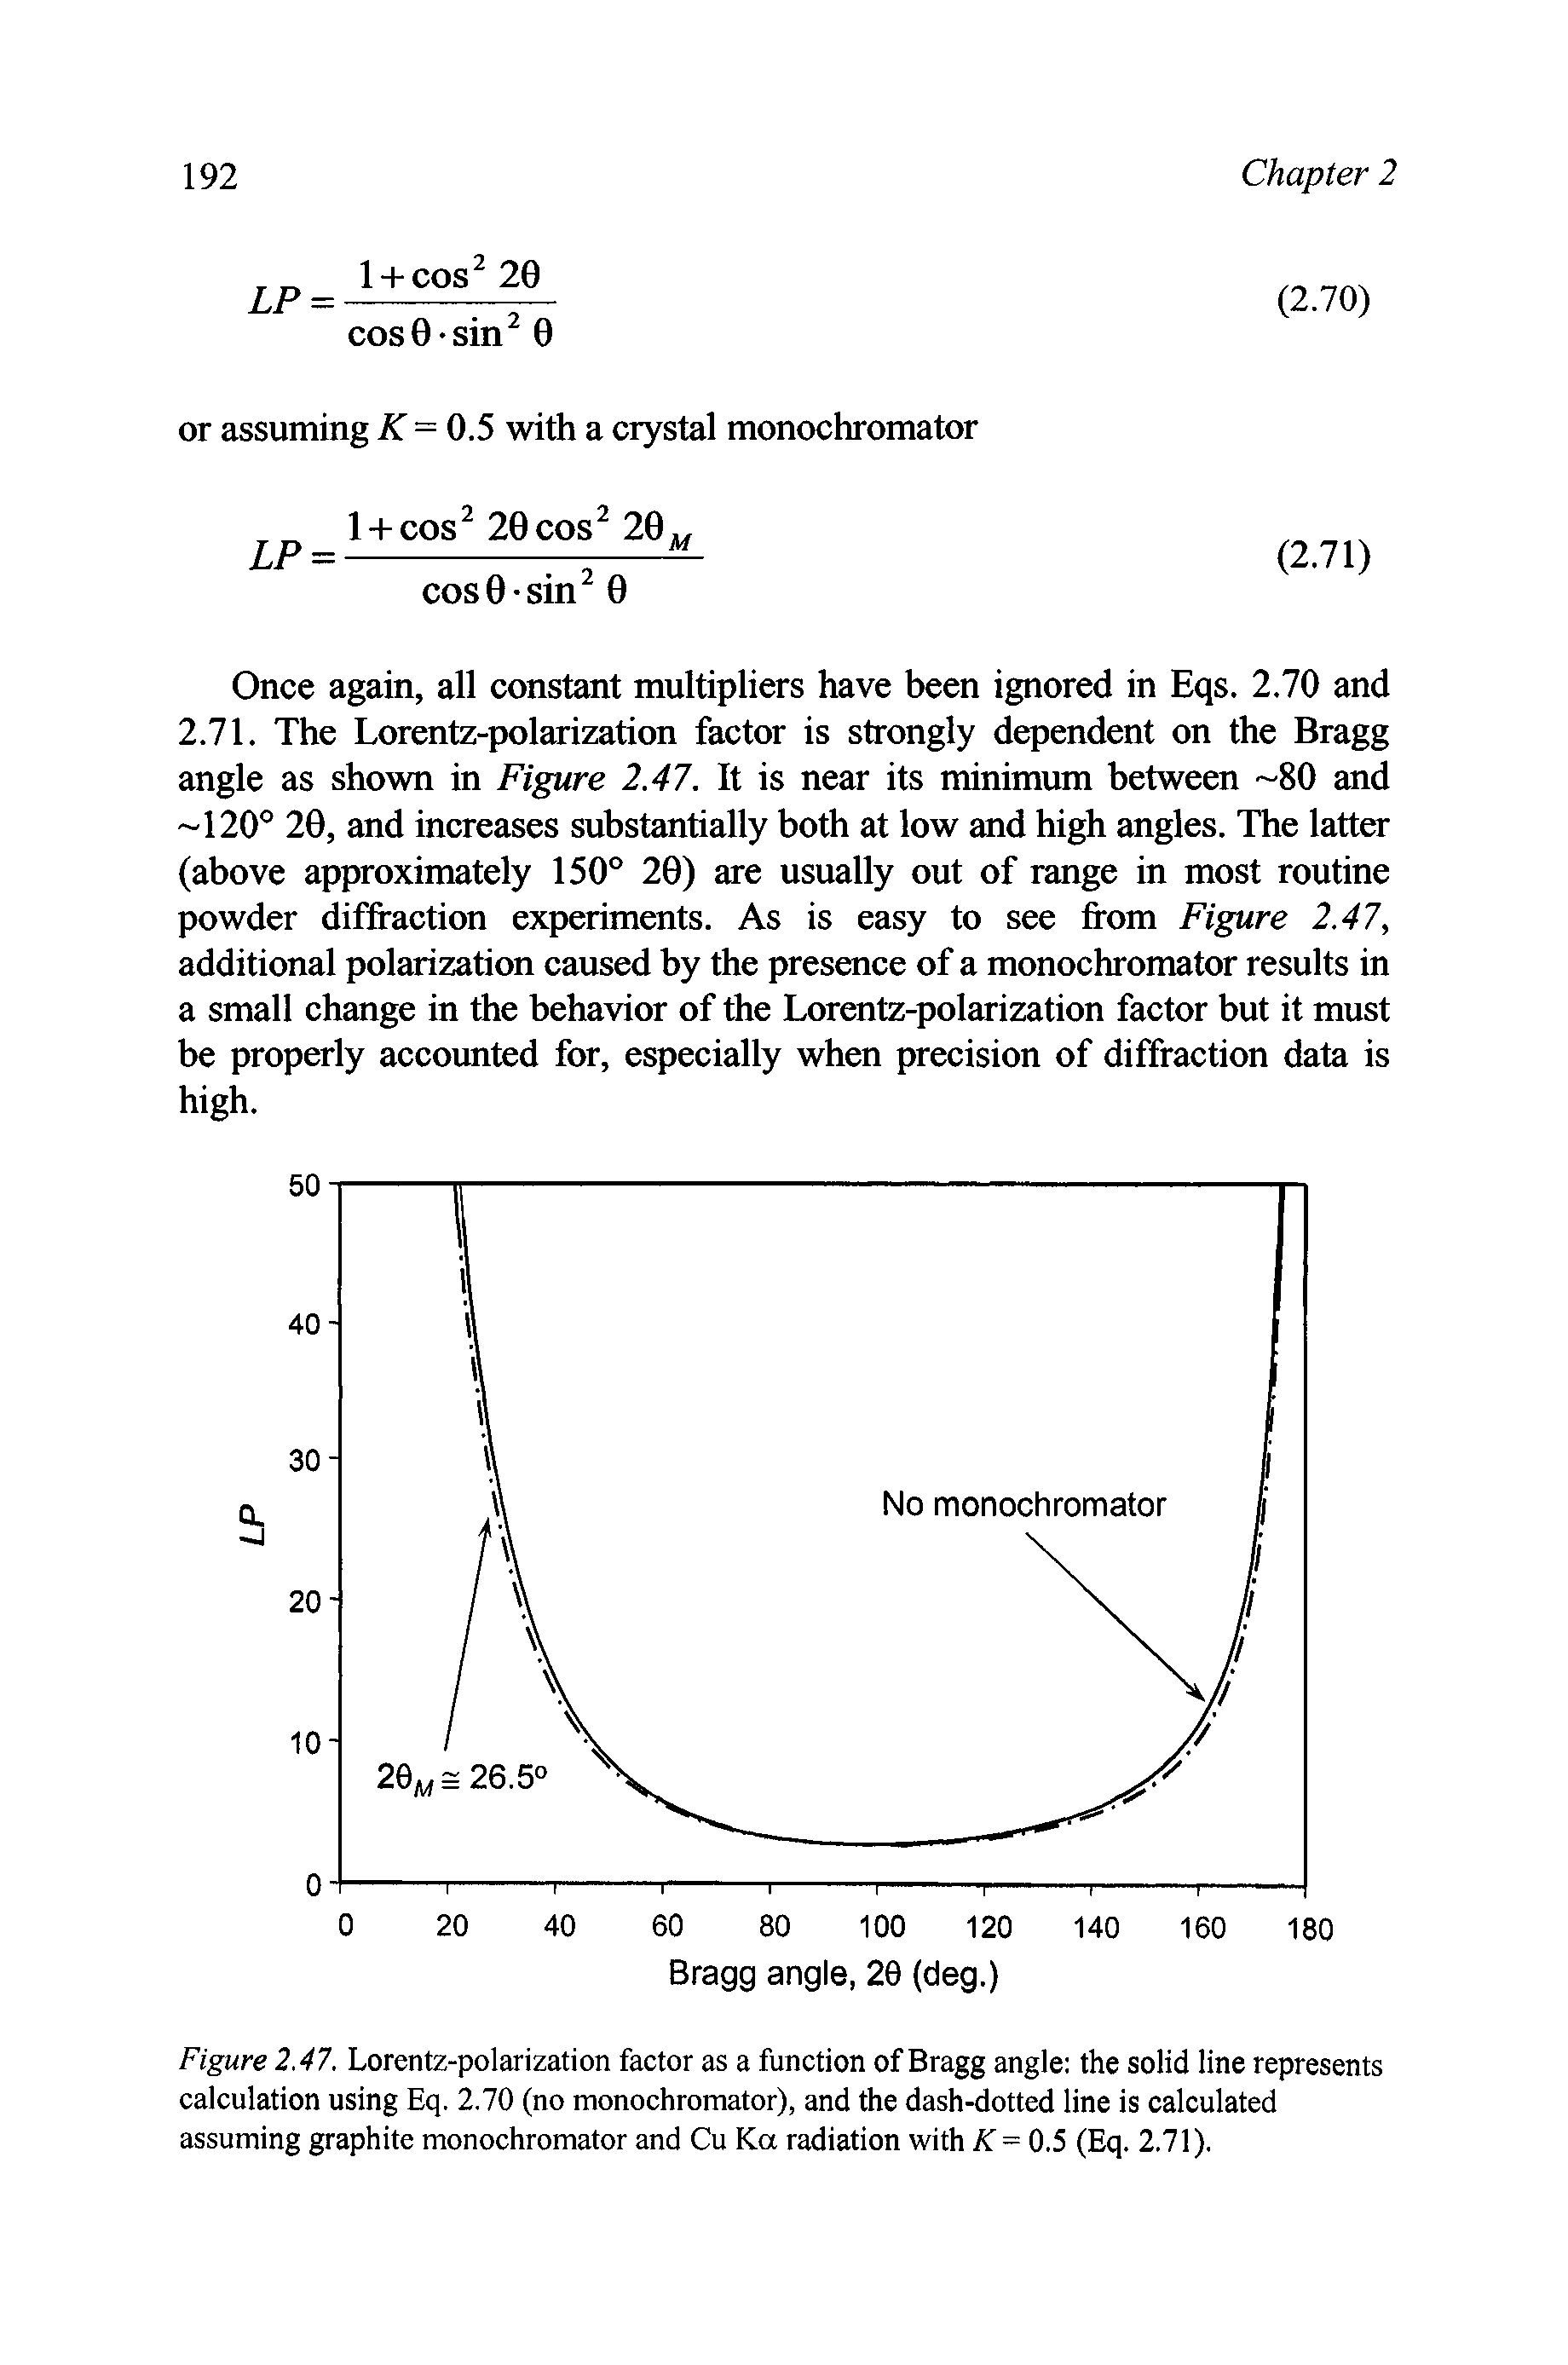 Figure 2.47. Lorentz-polarization factor as a function of Bragg angle the solid line represents calculation using Eq. 2.70 (no monochromator), and the dash-dotted line is calculated assuming graphite monochromator and Cu Ka radiation with K = 0.5 (Eq. 2.71).